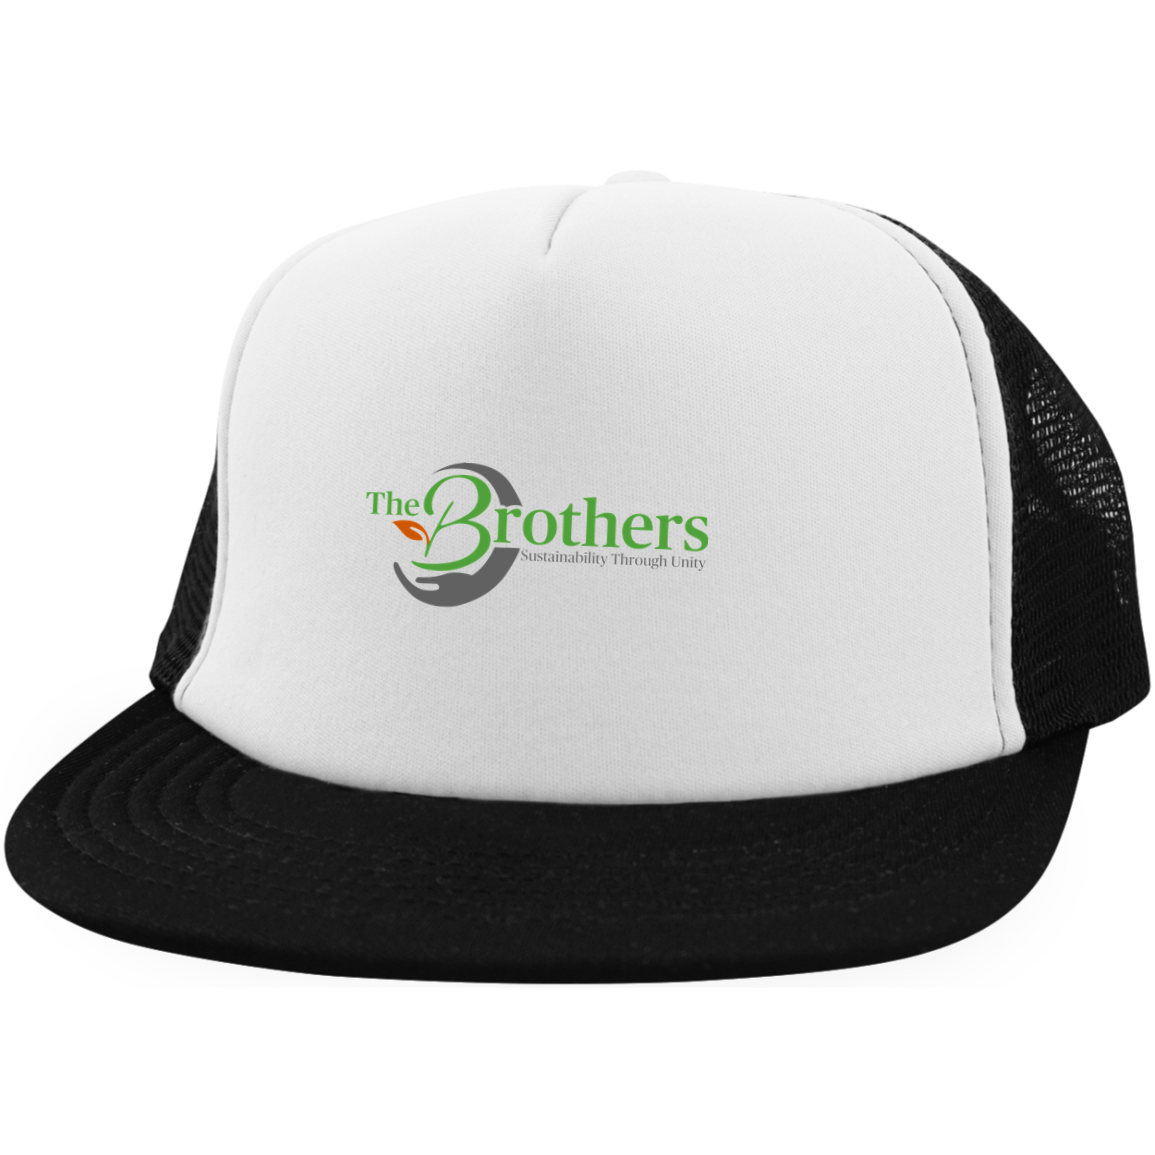 The Brothers Trucker Hat with Snapback